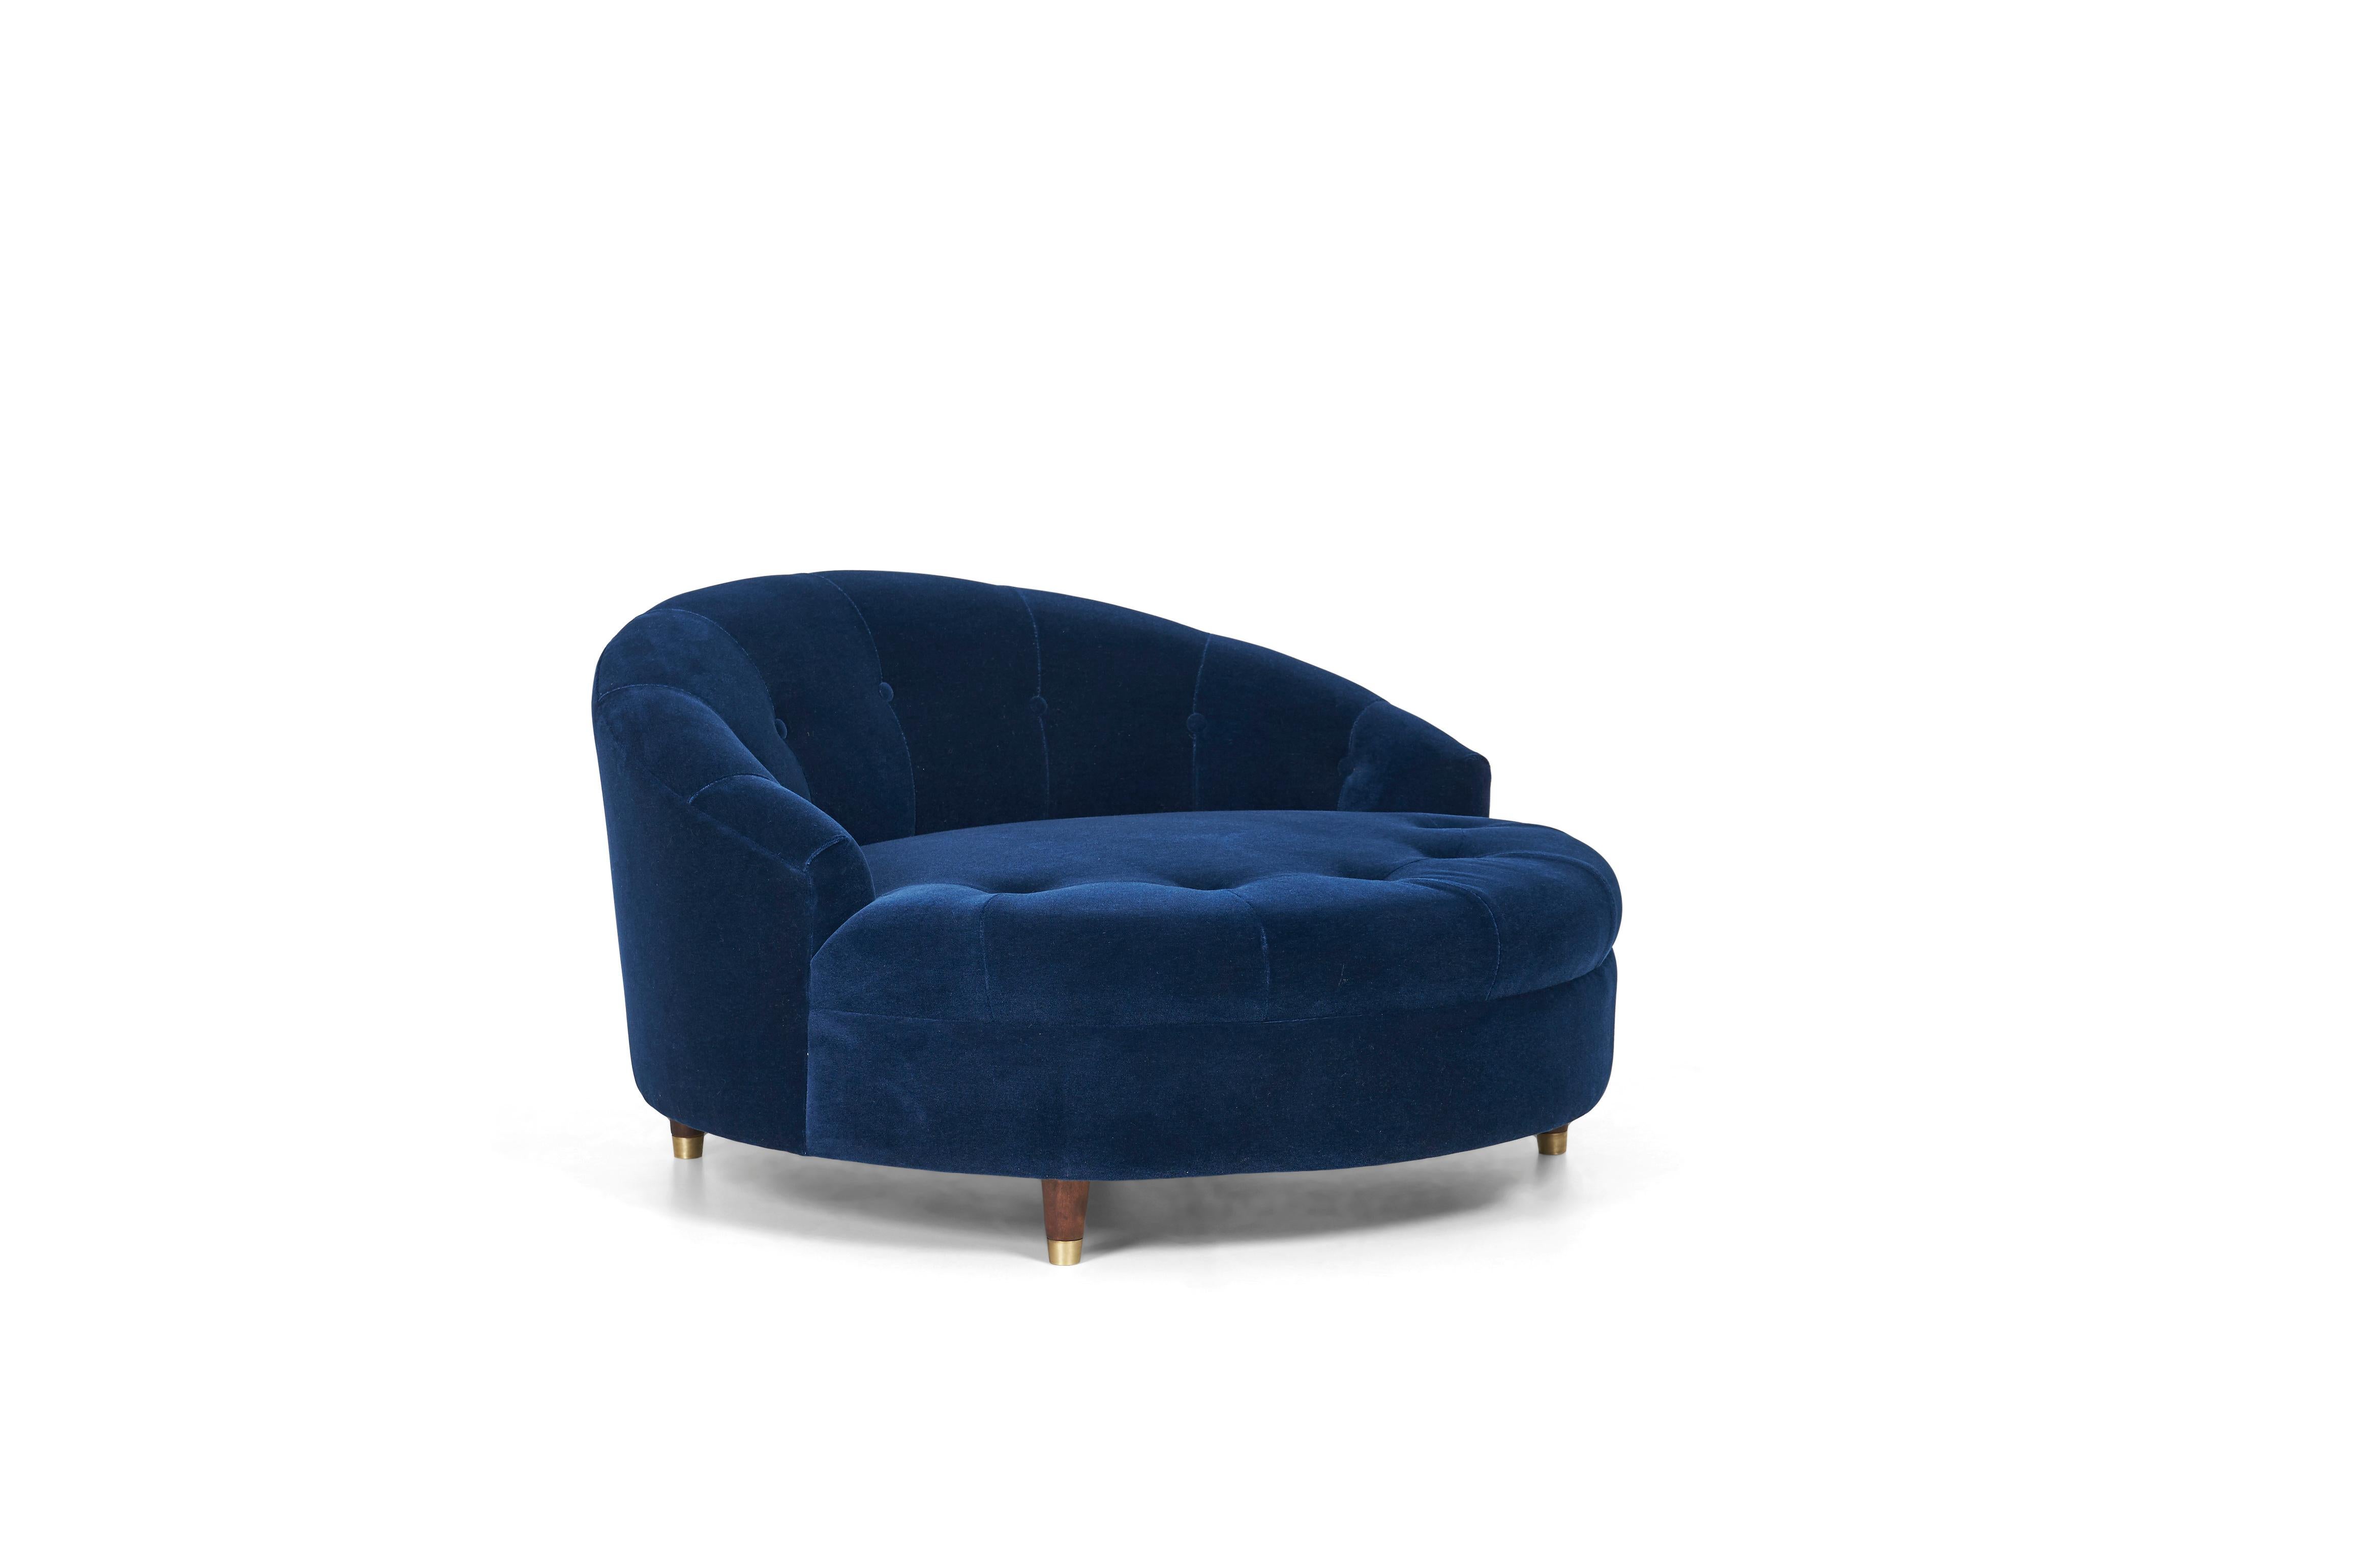 Adrian Pearsall round chaise, reupholstered with dark blue great plains mohair. Solid walnut tapered legs with brass caps.